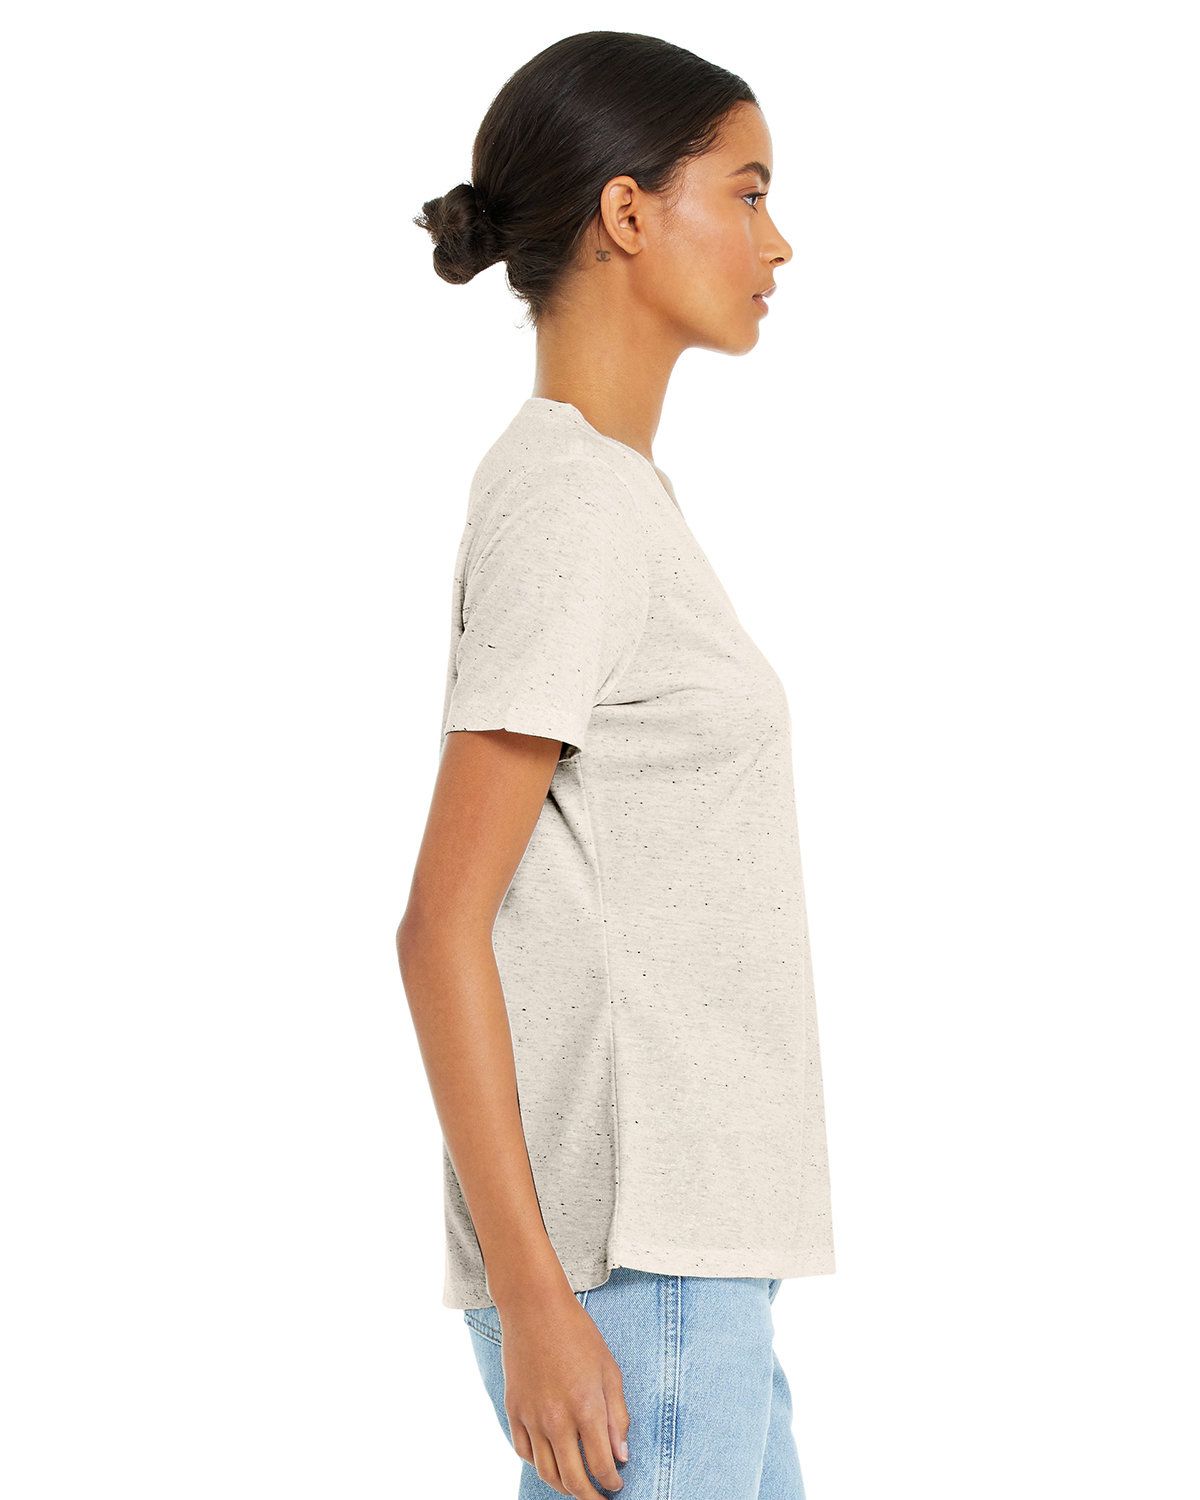 'Bella Canvas 6415 Women's Relaxed Triblend Short Sleeve V Neck Tee'